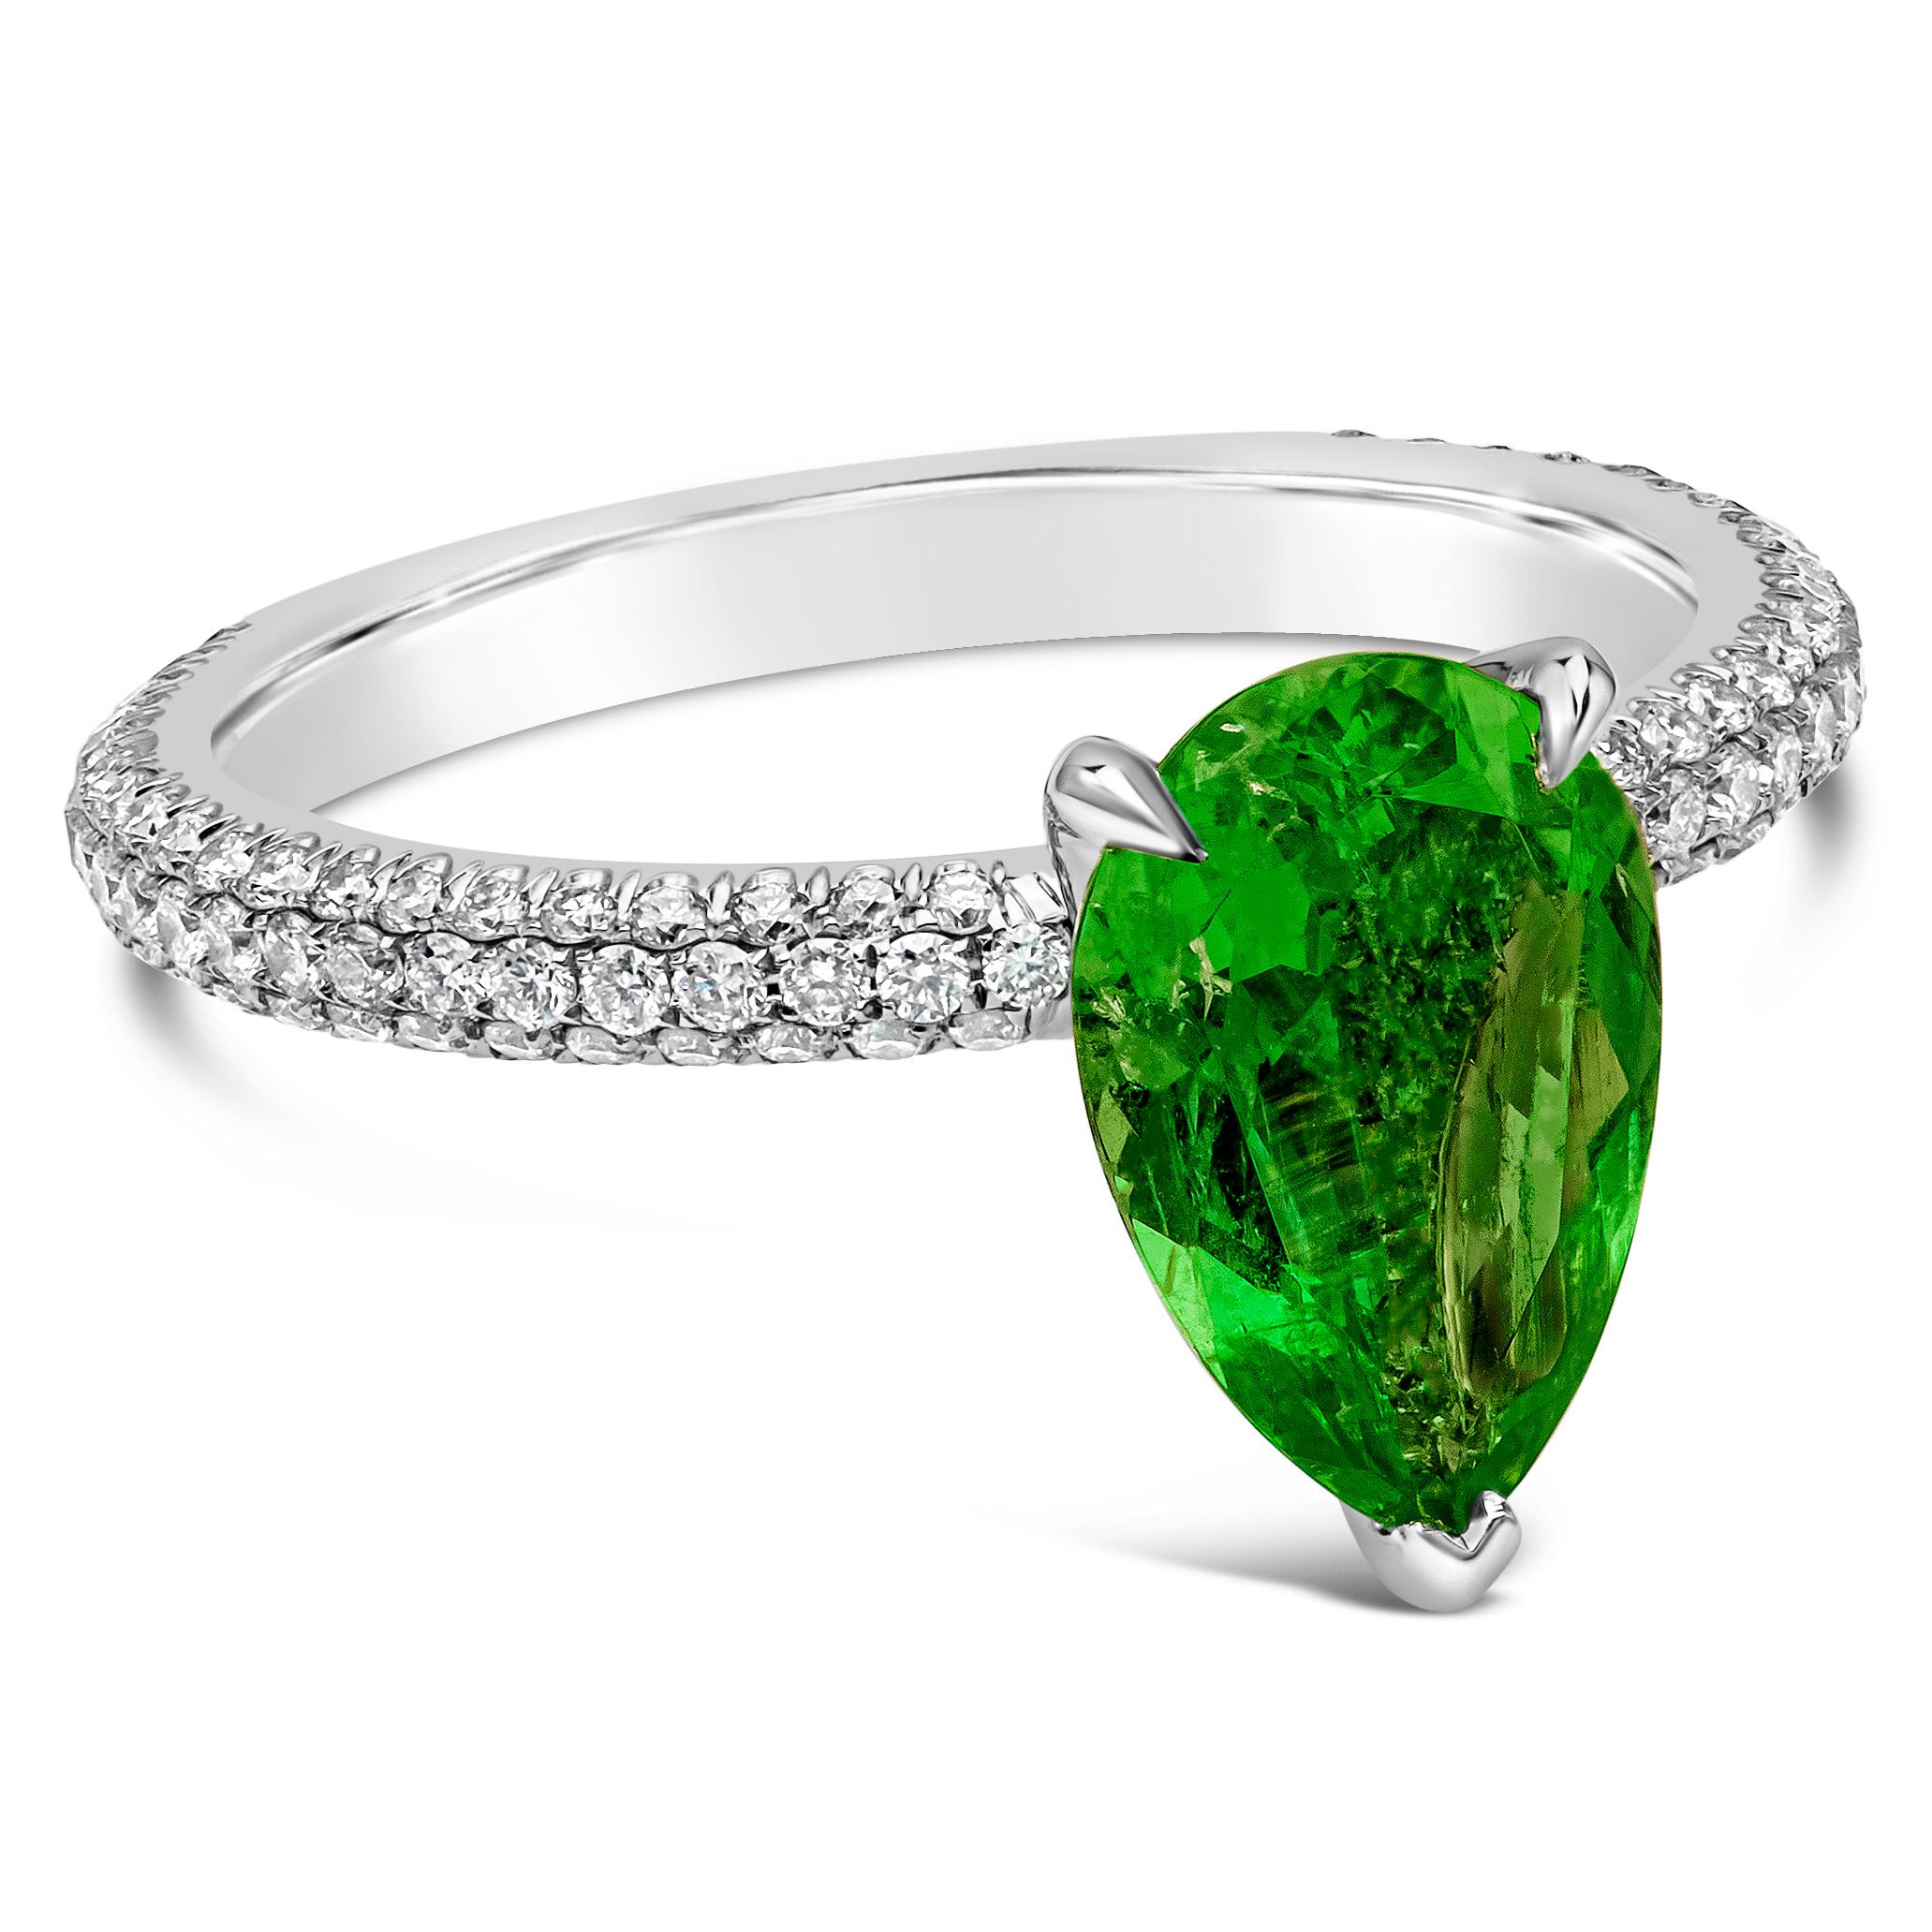 Features a vibrant 1.42 carat pear shape colombian green emerald, SI in Clarity. Accented with brilliant round diamonds weighing 0.58 carats total, F Color and VS in Clarity. Size 6 US

Roman Malakov is a custom house, specializing in creating